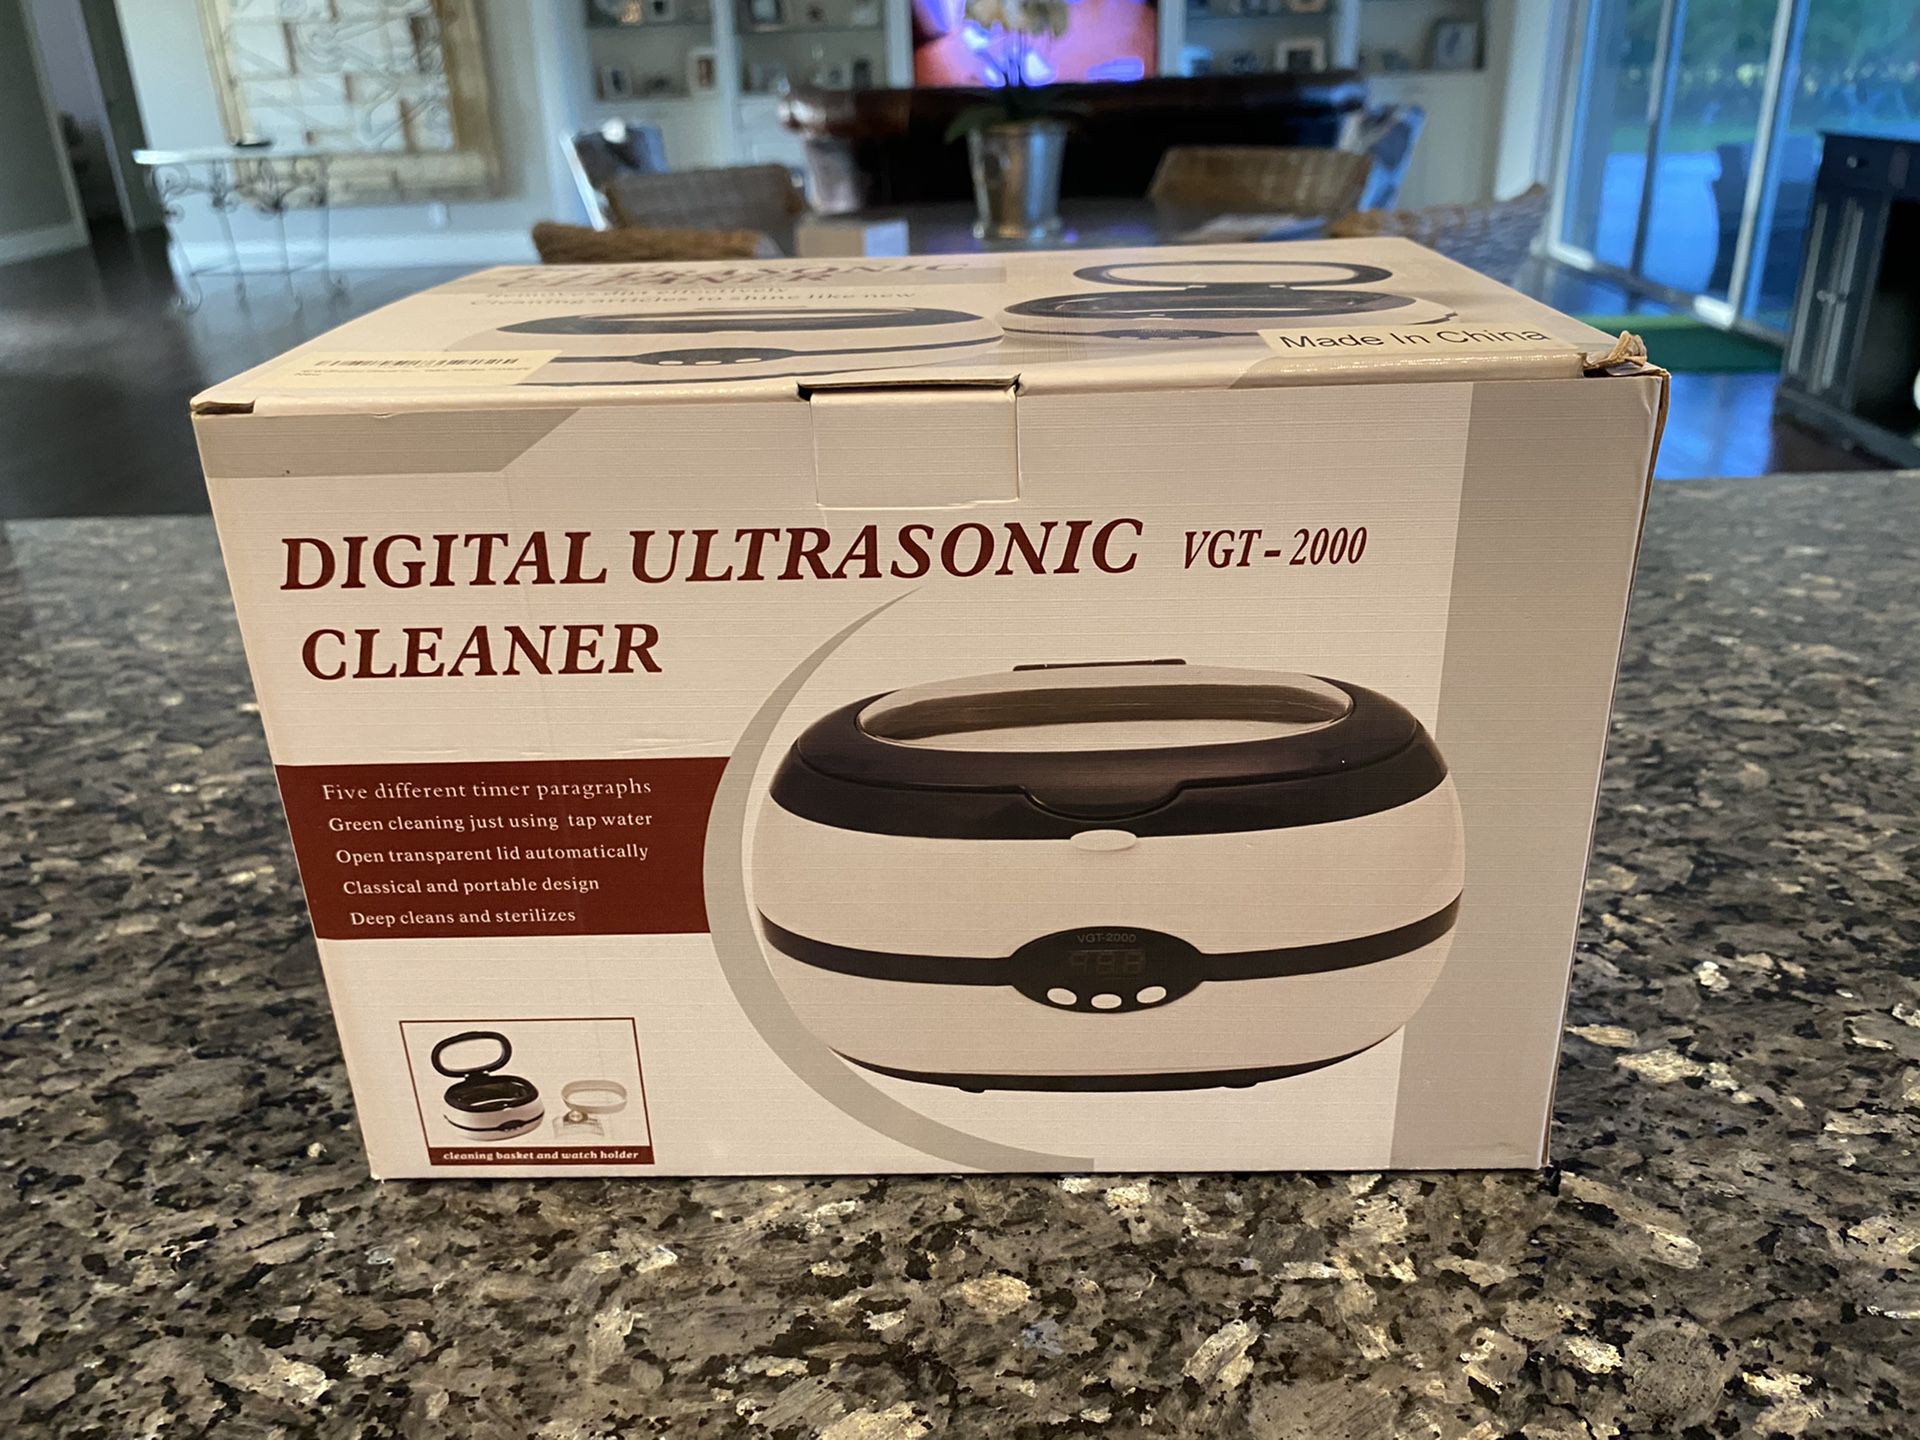 No chemicals! Ultrasonic cleaner uses water only. Stainless steel tub, clear lid for viewing. Original packaging NEVER used.